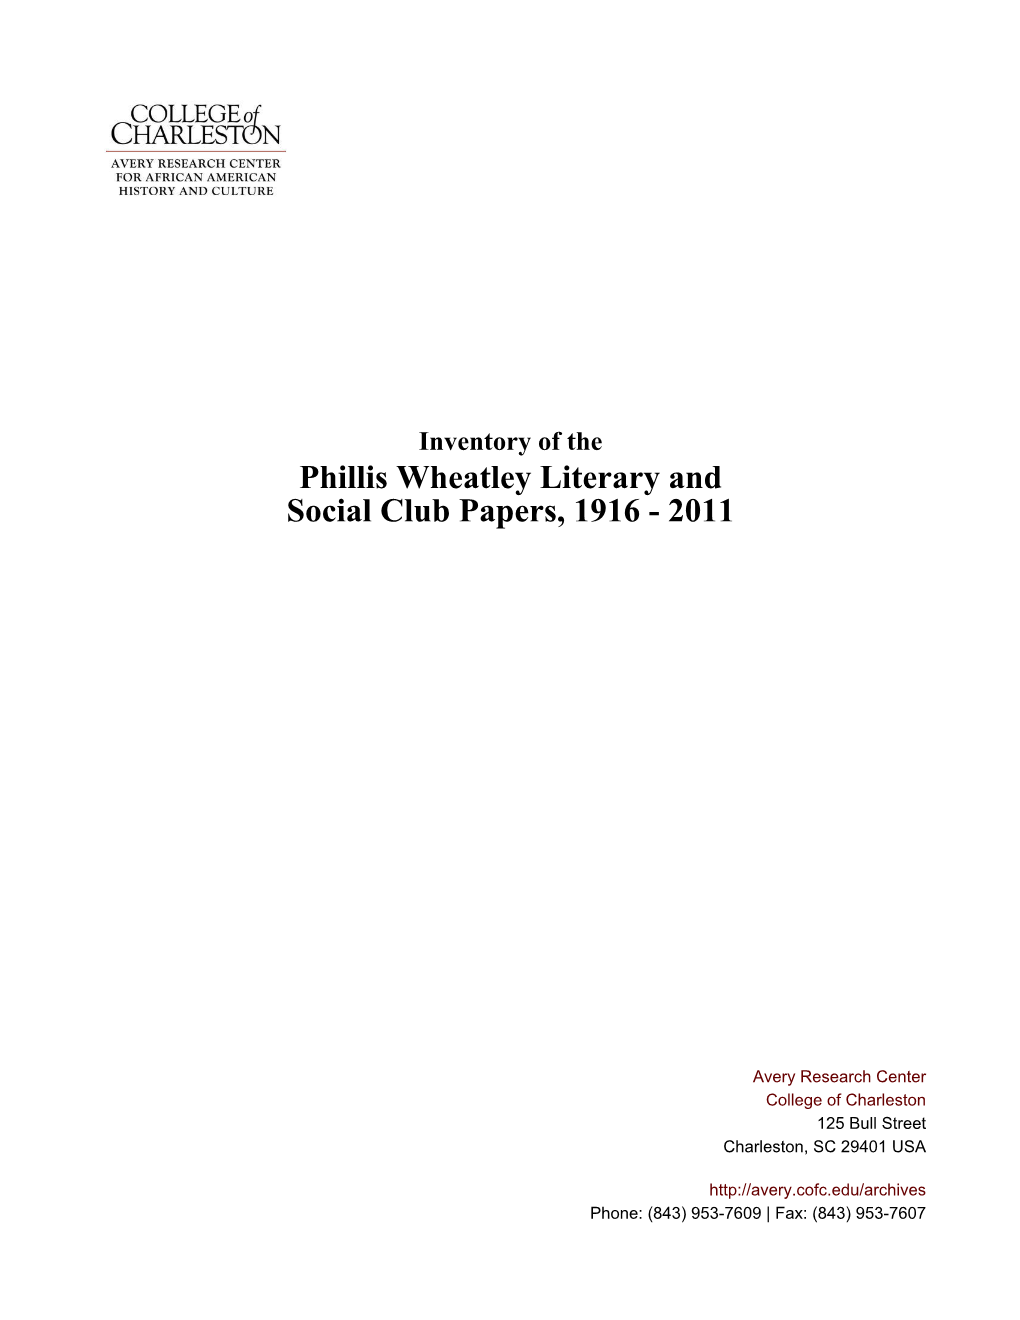 Phillis Wheatley Literary and Social Club Papers, 1916 - 2011